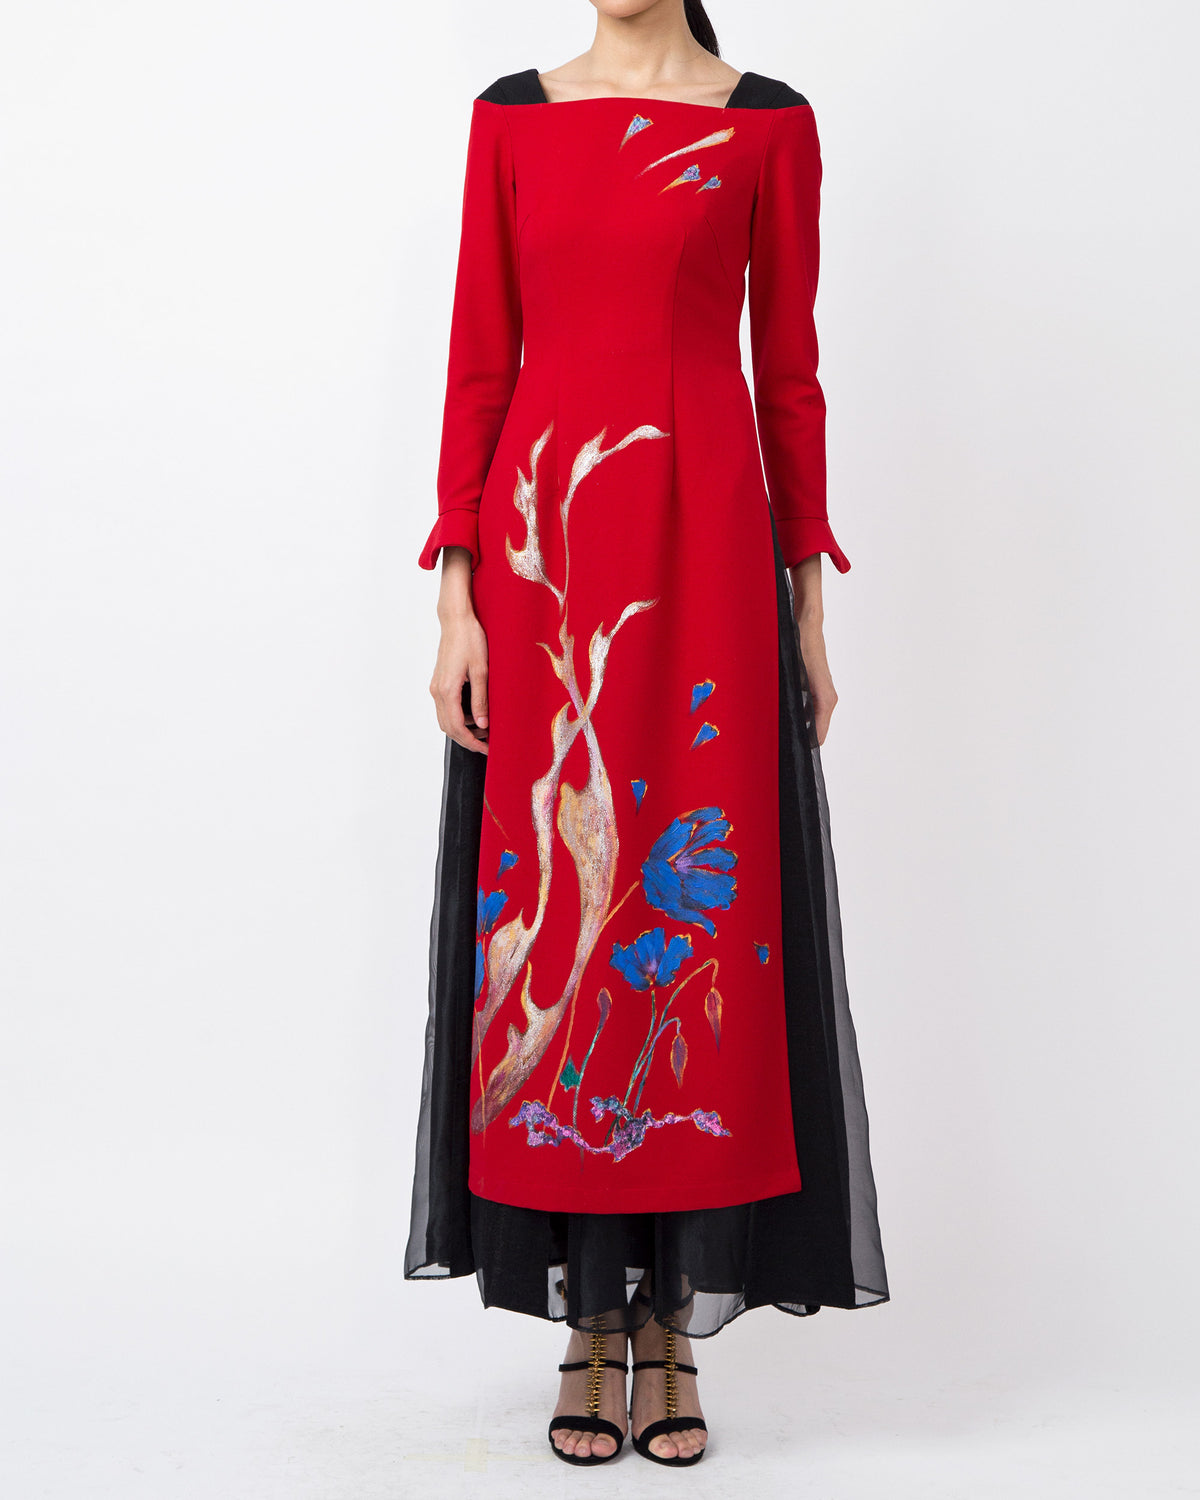 Phoenix in Poppy-painted Circular Cuffs Sleeve Red Contemporary Ao Dai